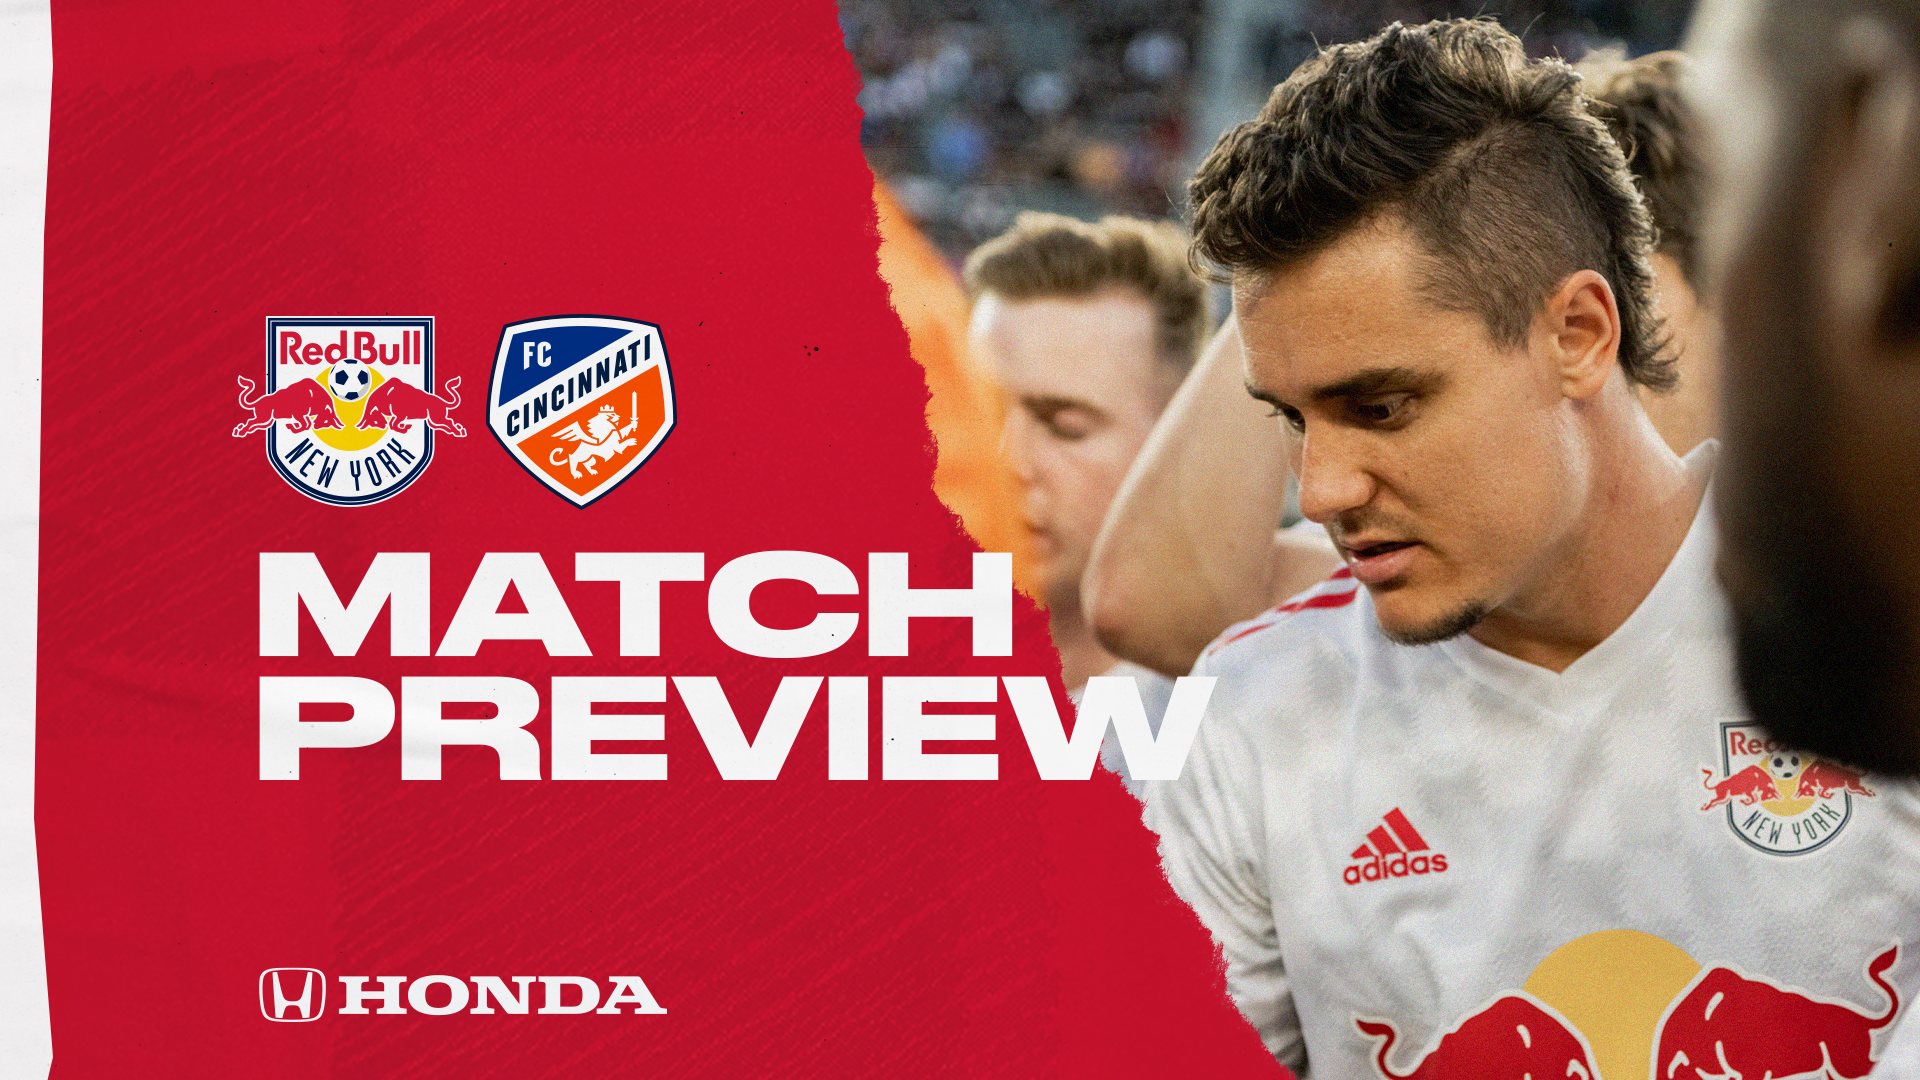 MATCH PREVIEW, pres. by Honda: New York Begins Two-Match Homestand 